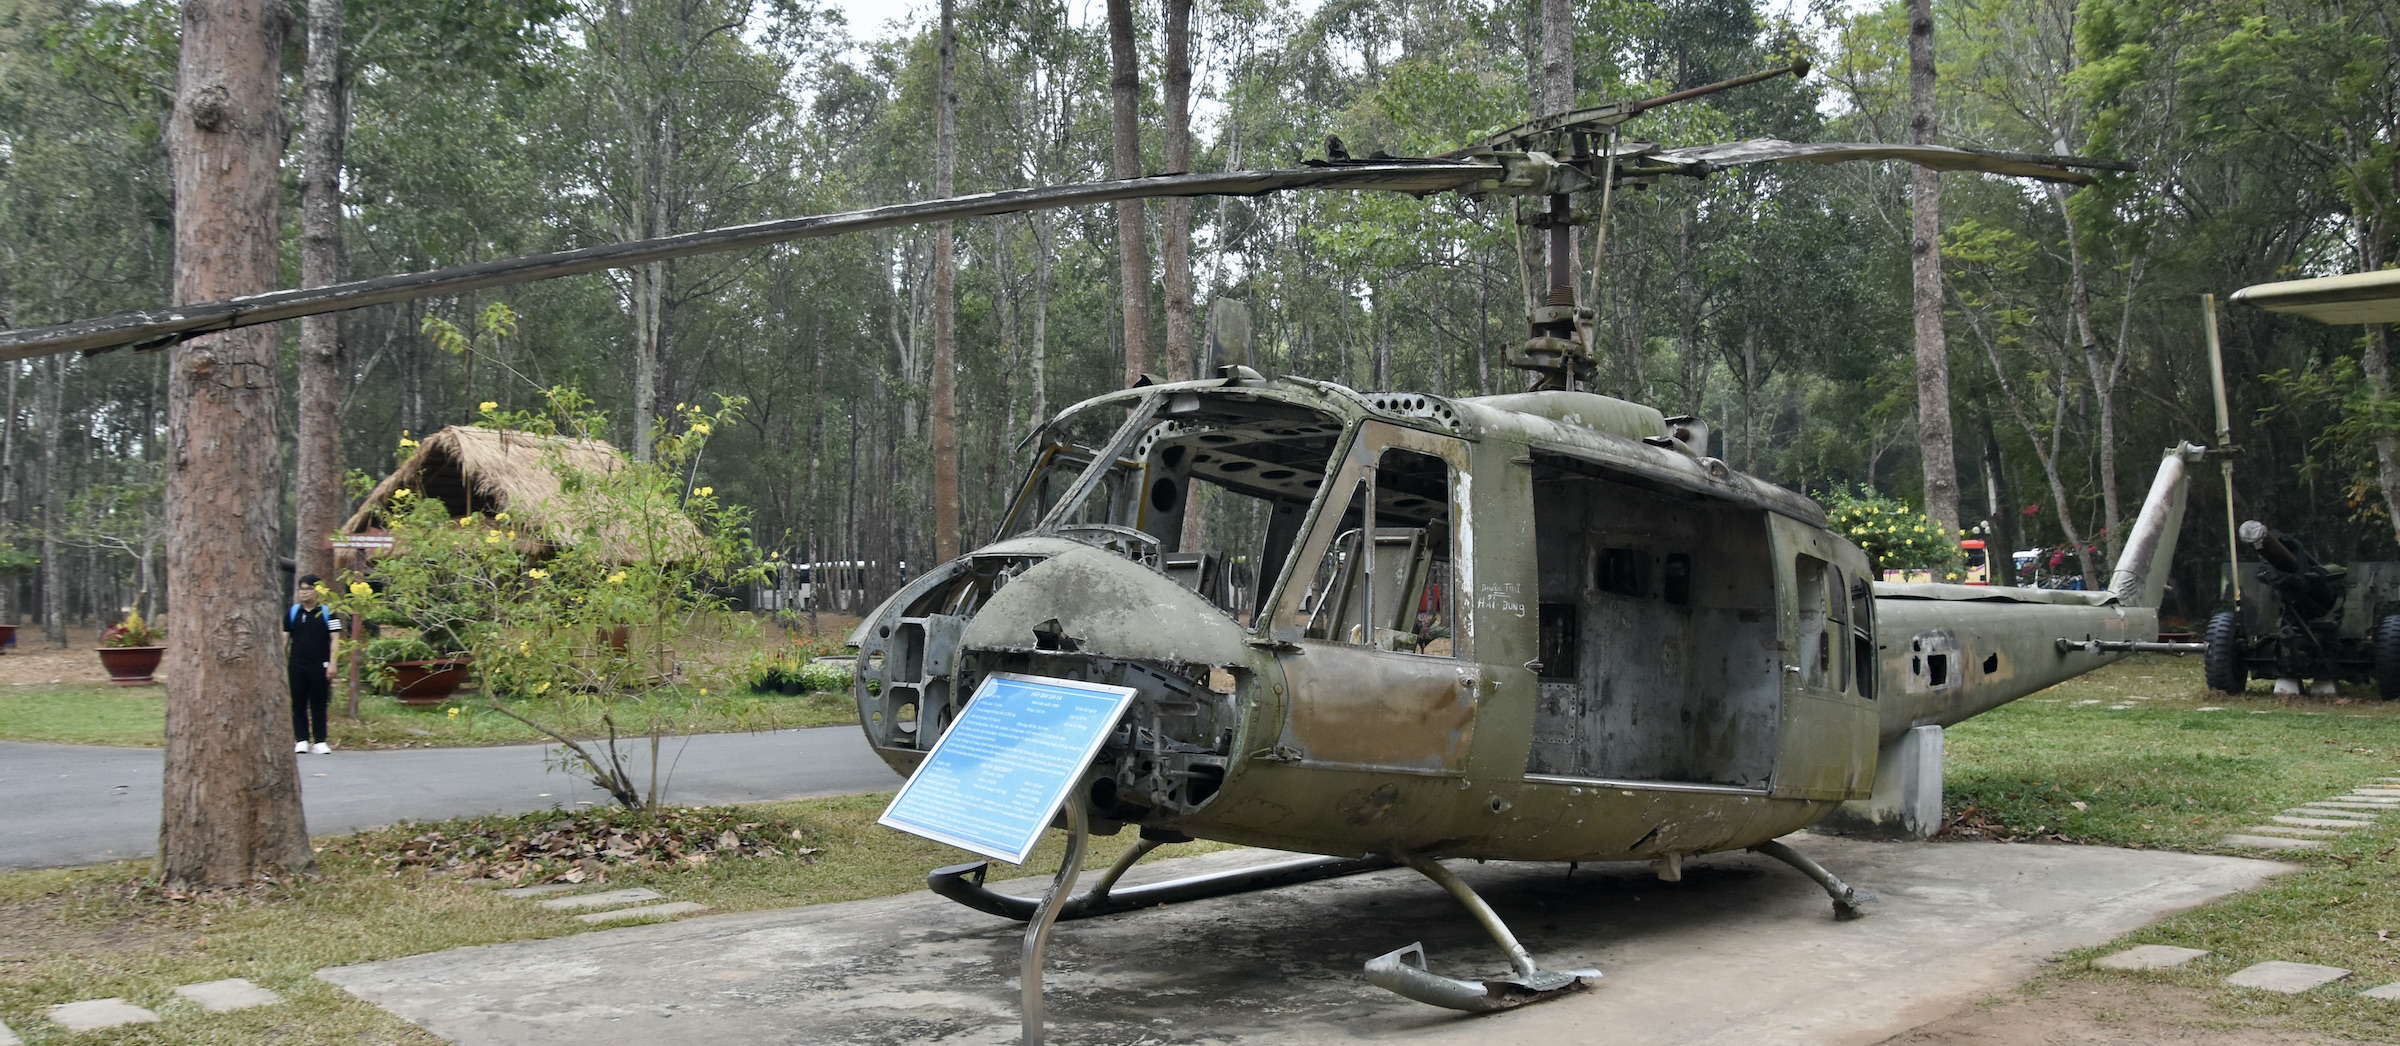 Destroyed Helicopter outside of Hanoi